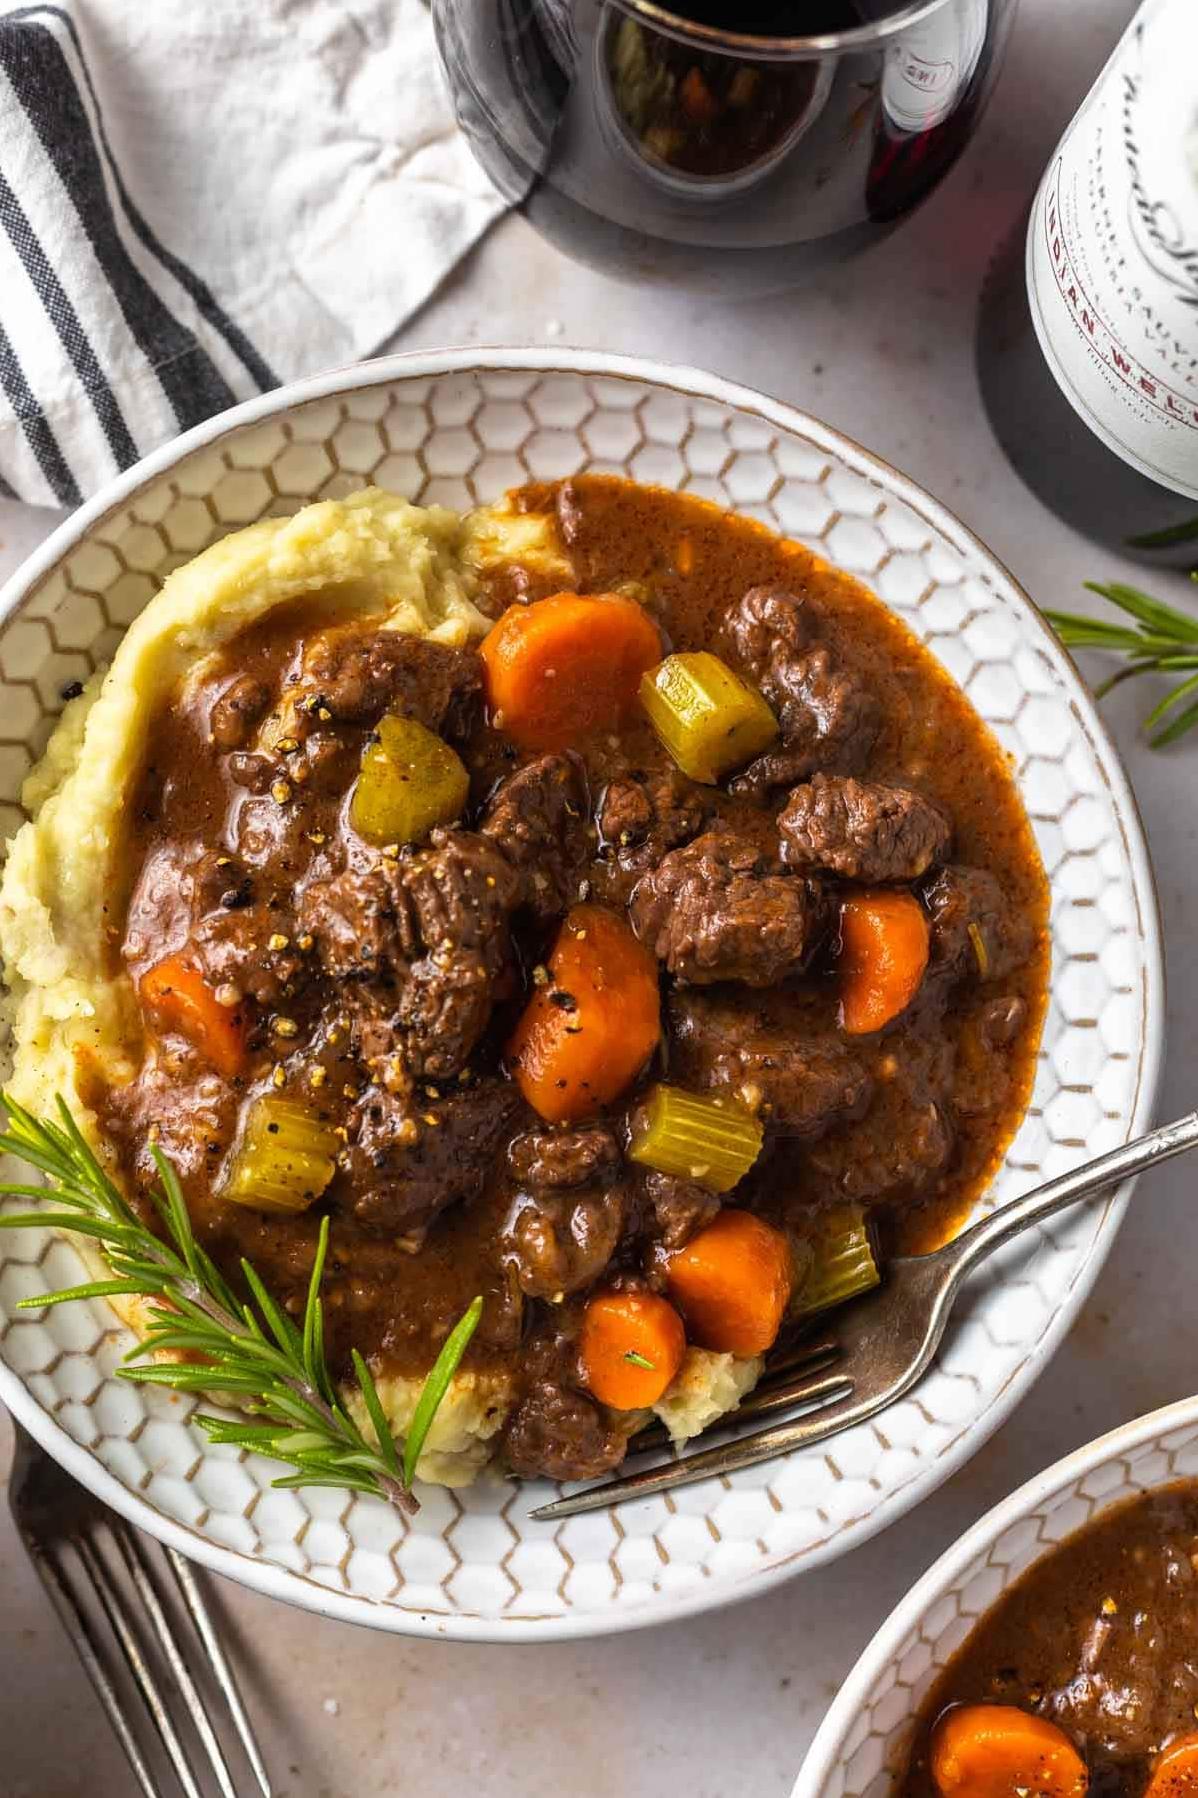  A hearty and warming meal perfect for a cozy night in.